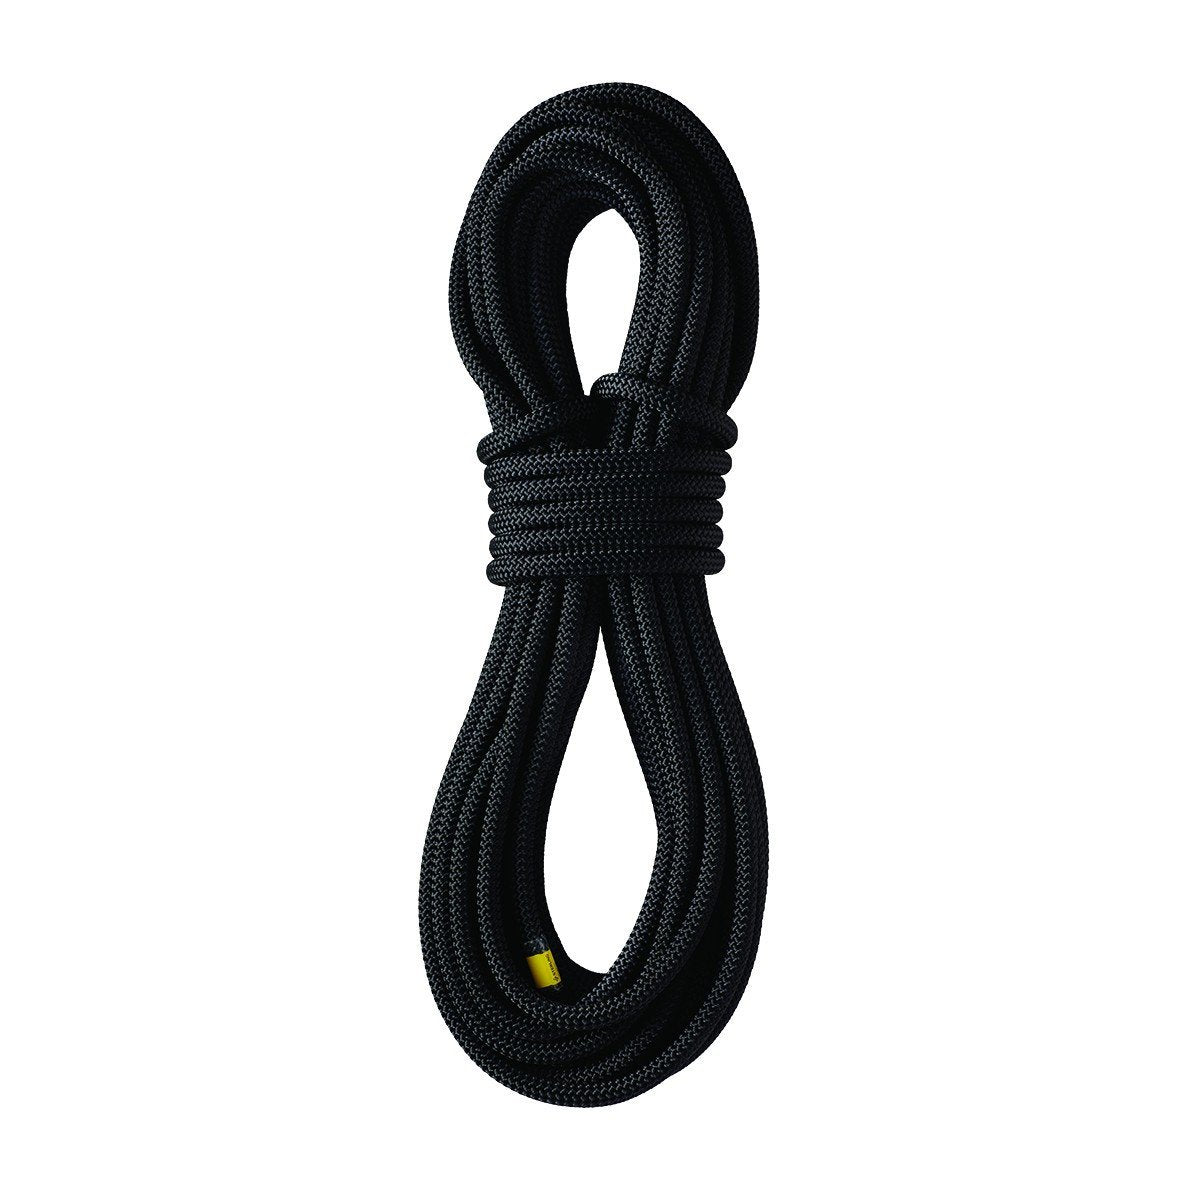 Gym Climbing Rope - £103.80 : your online rope supplier, ropelocker